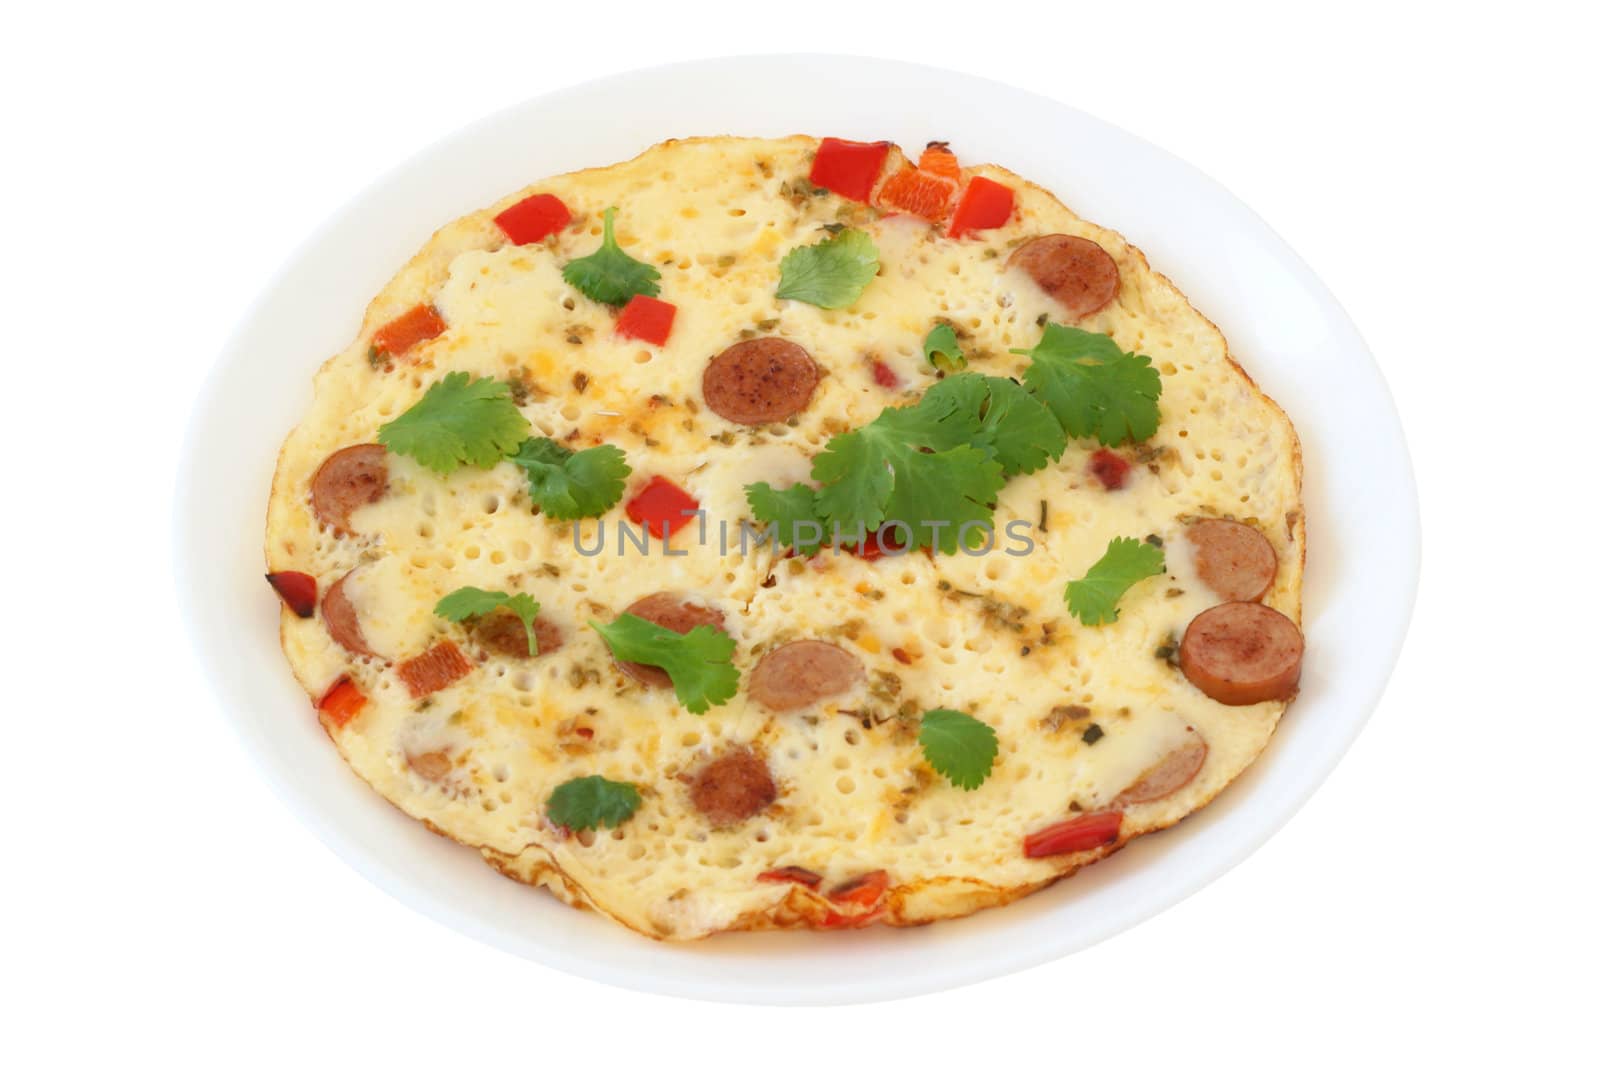 omelet with sausages